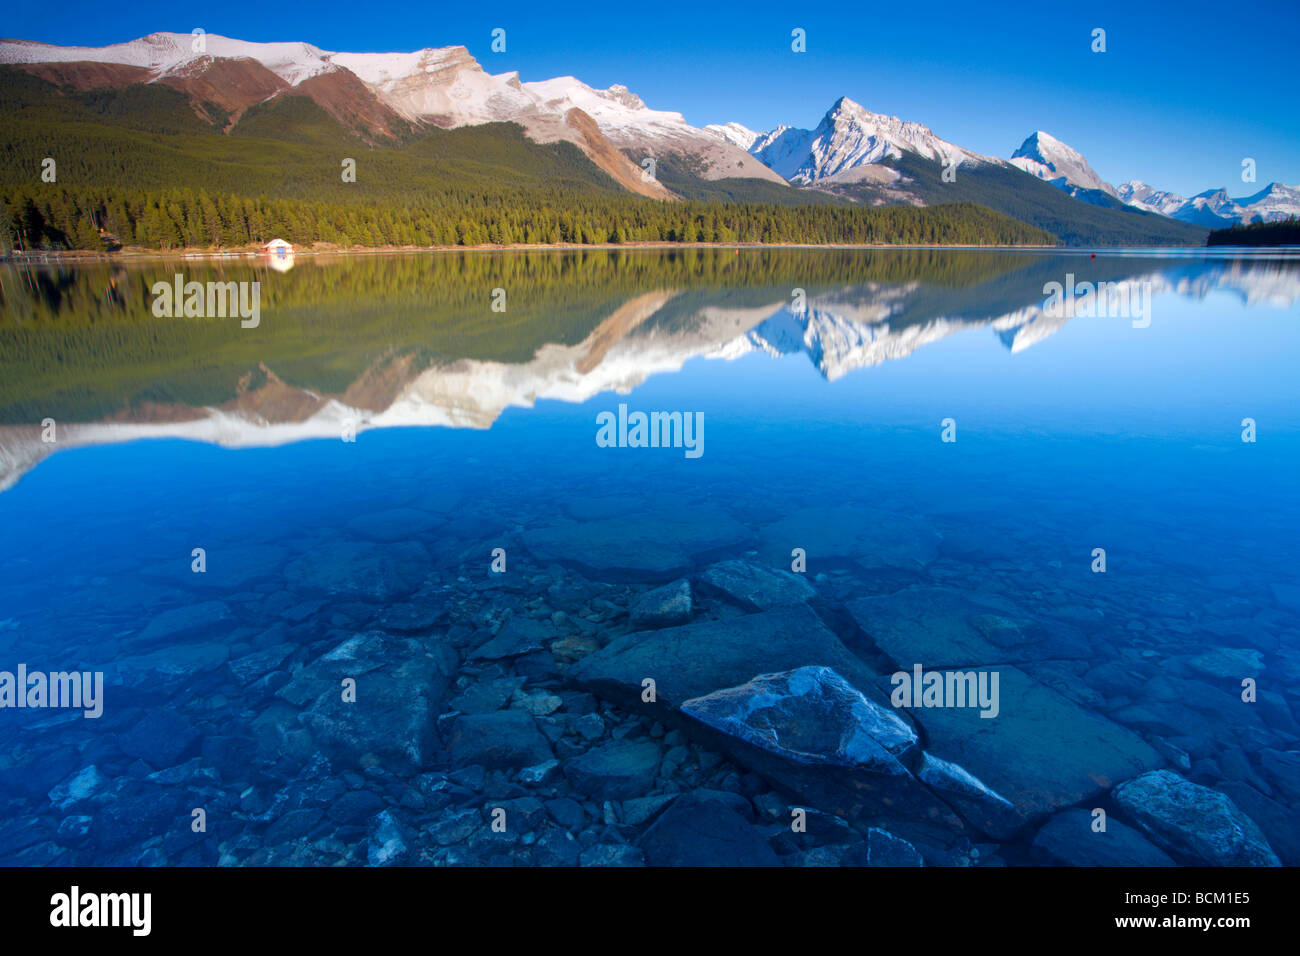 Crystal clear water with reflections at Maligne Lake Canadian Rockies Jasper National Park Alberta Canada October 2006 Stock Photo